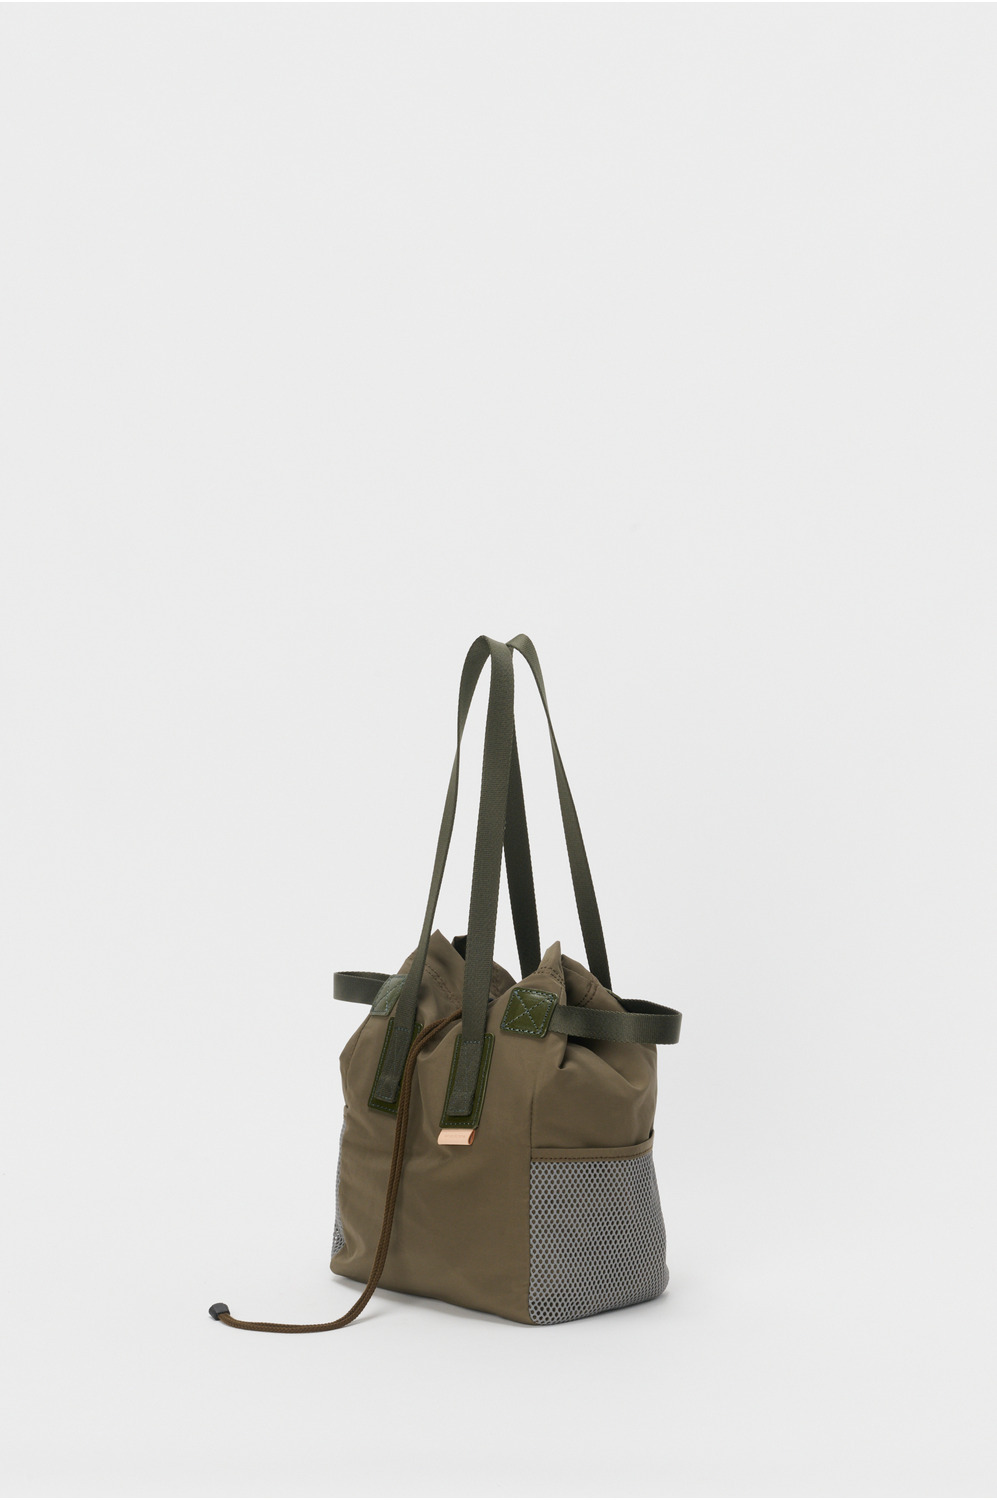 functional tote bag small 詳細画像 khaki olive 2